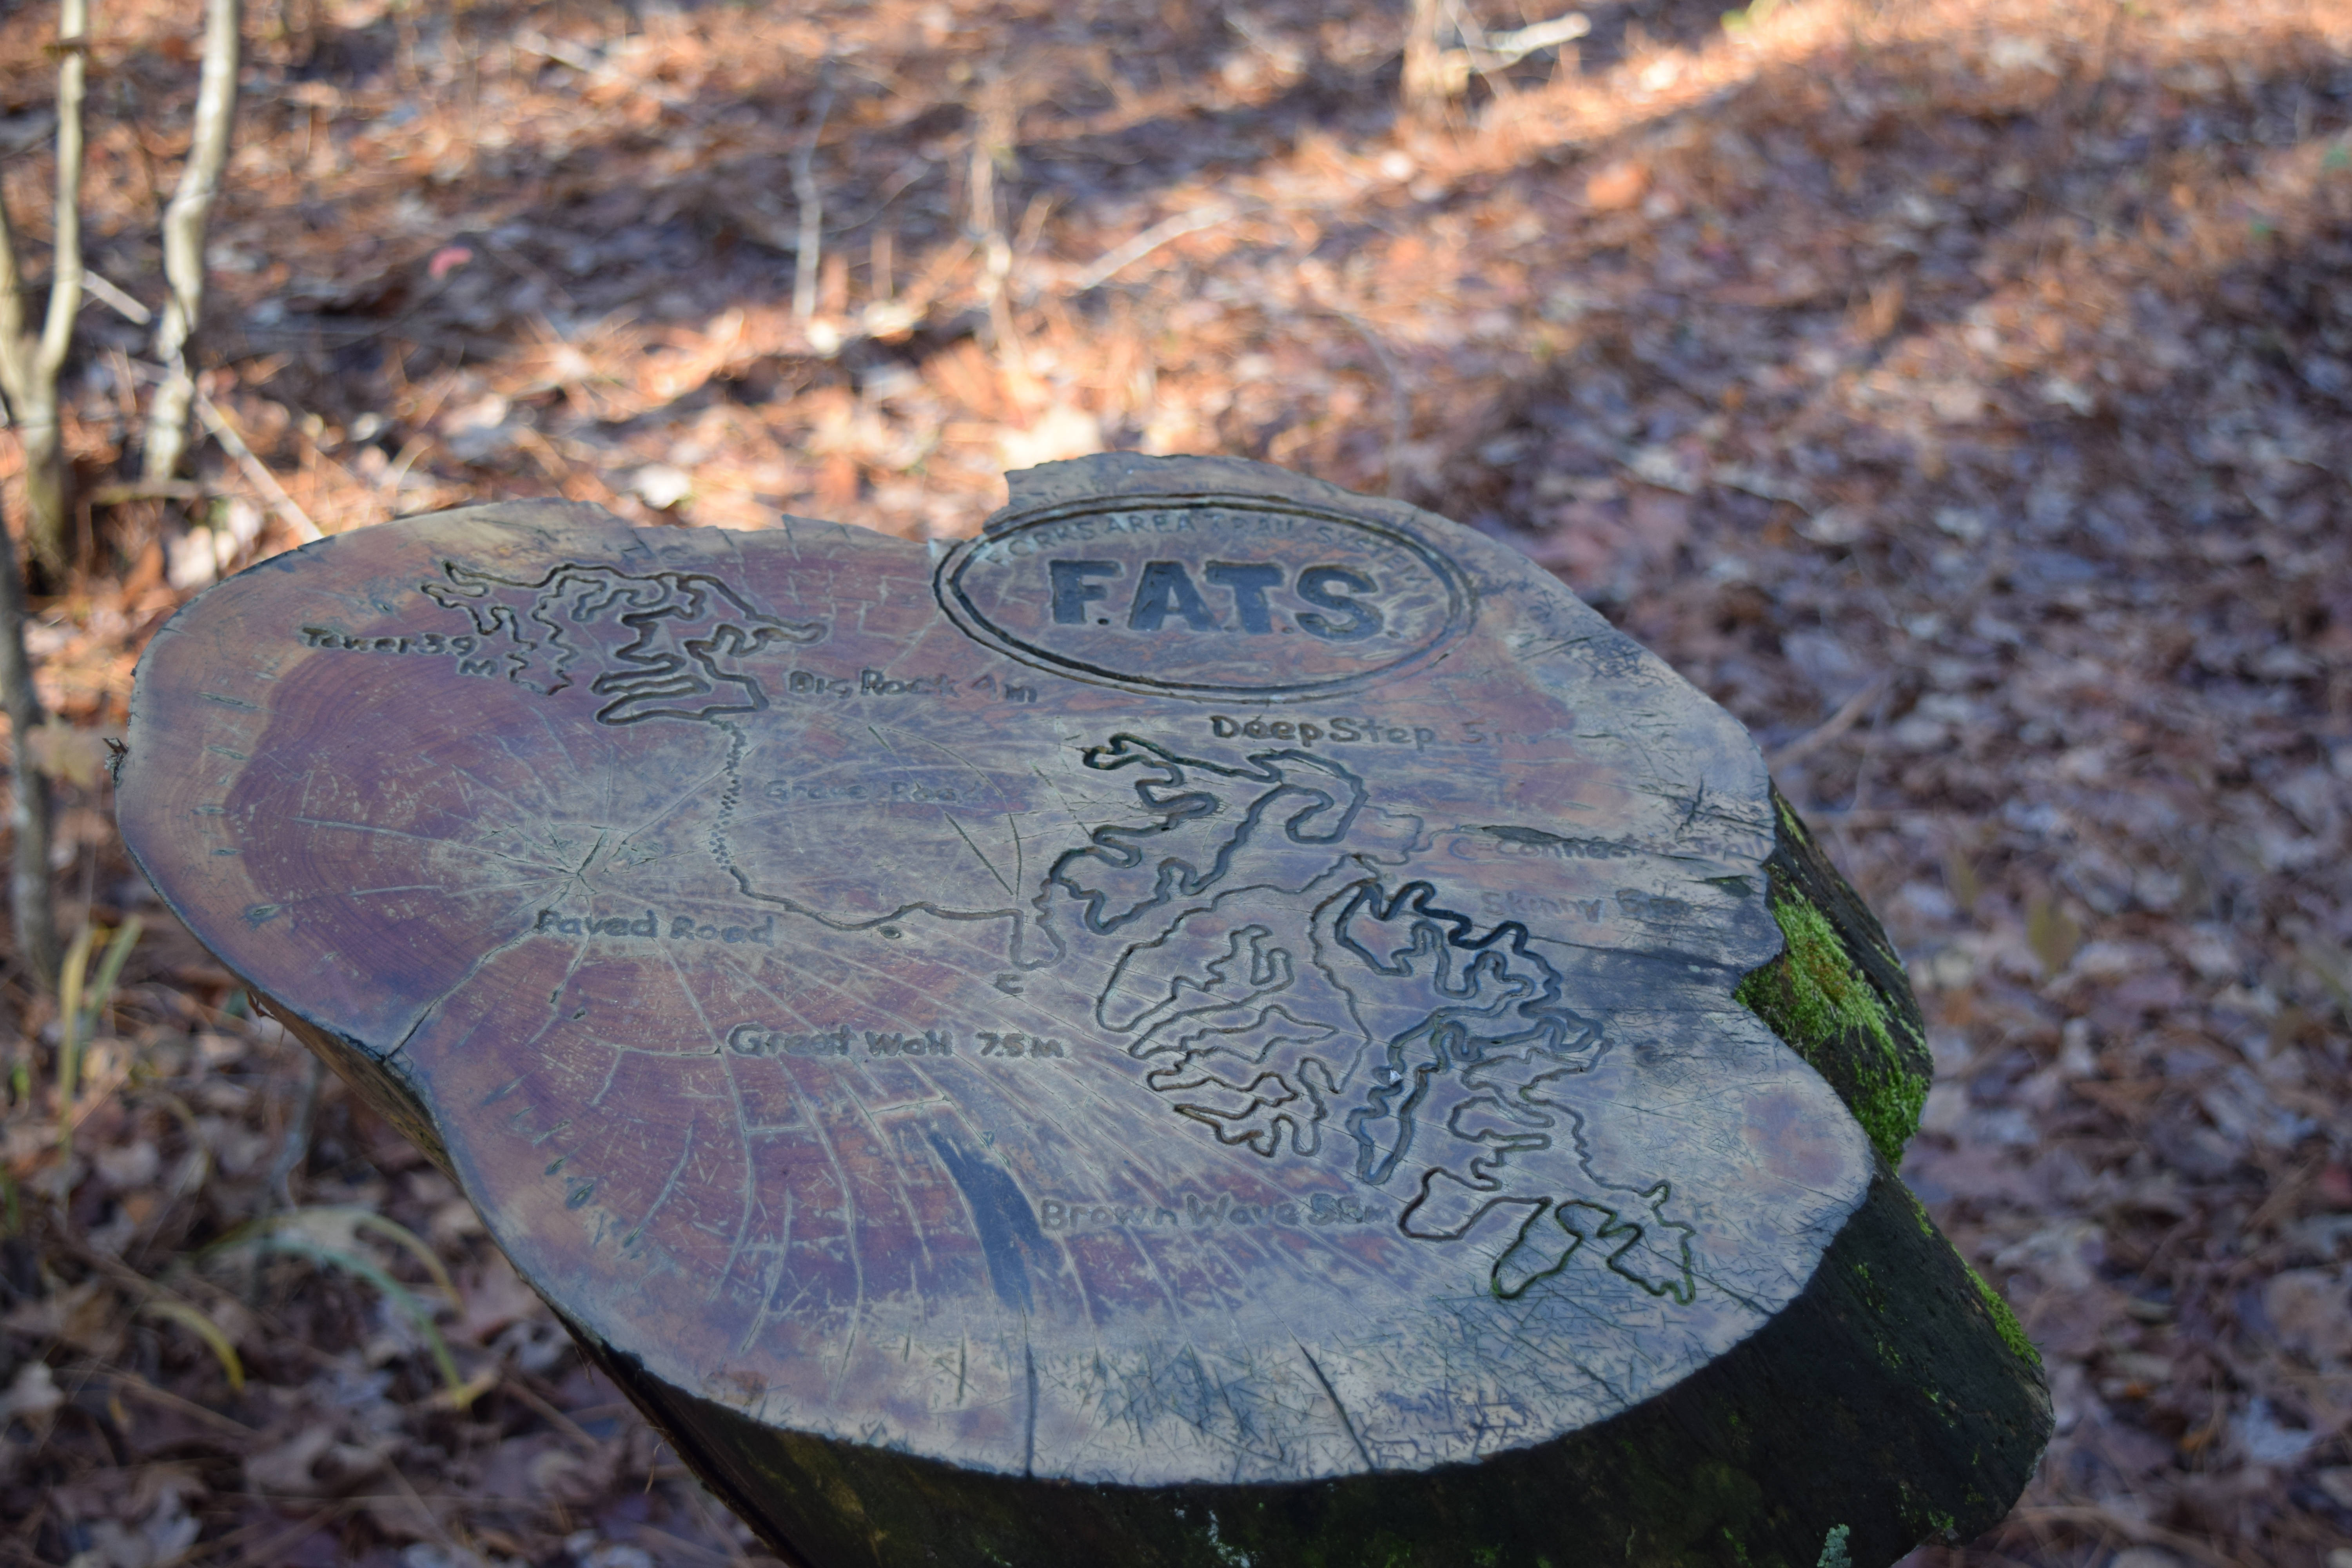 Wood carving of the Forks Area Trail System map